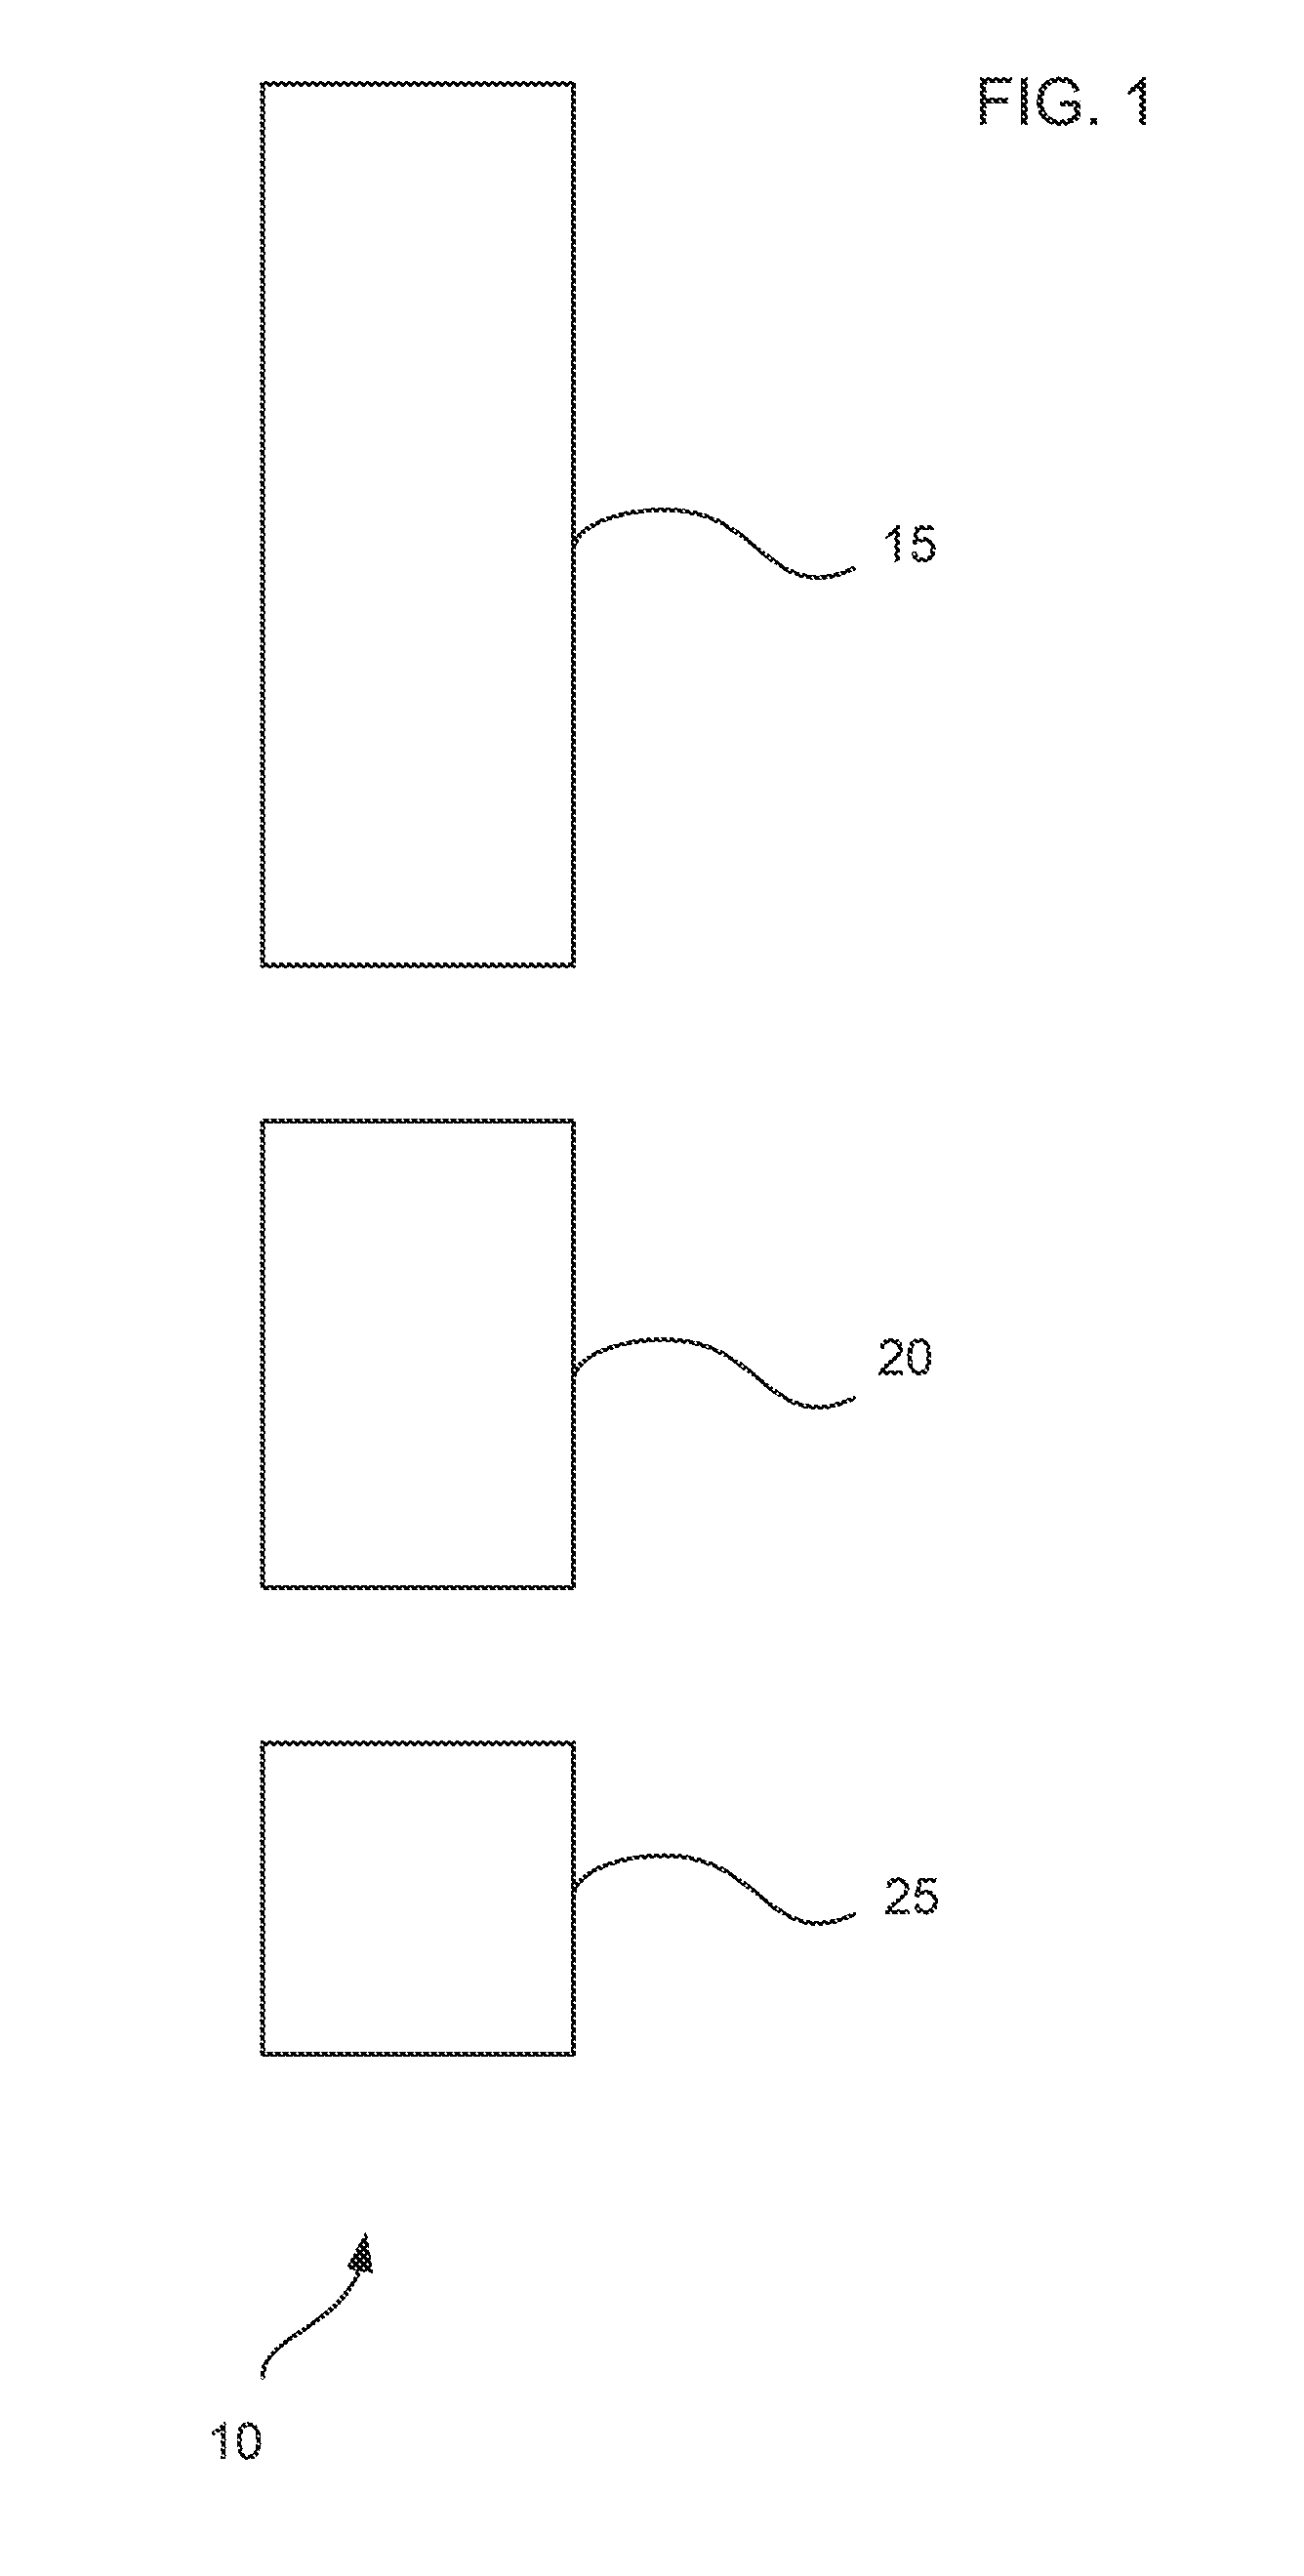 Kit and method for extracting and storing a skin tissue sample